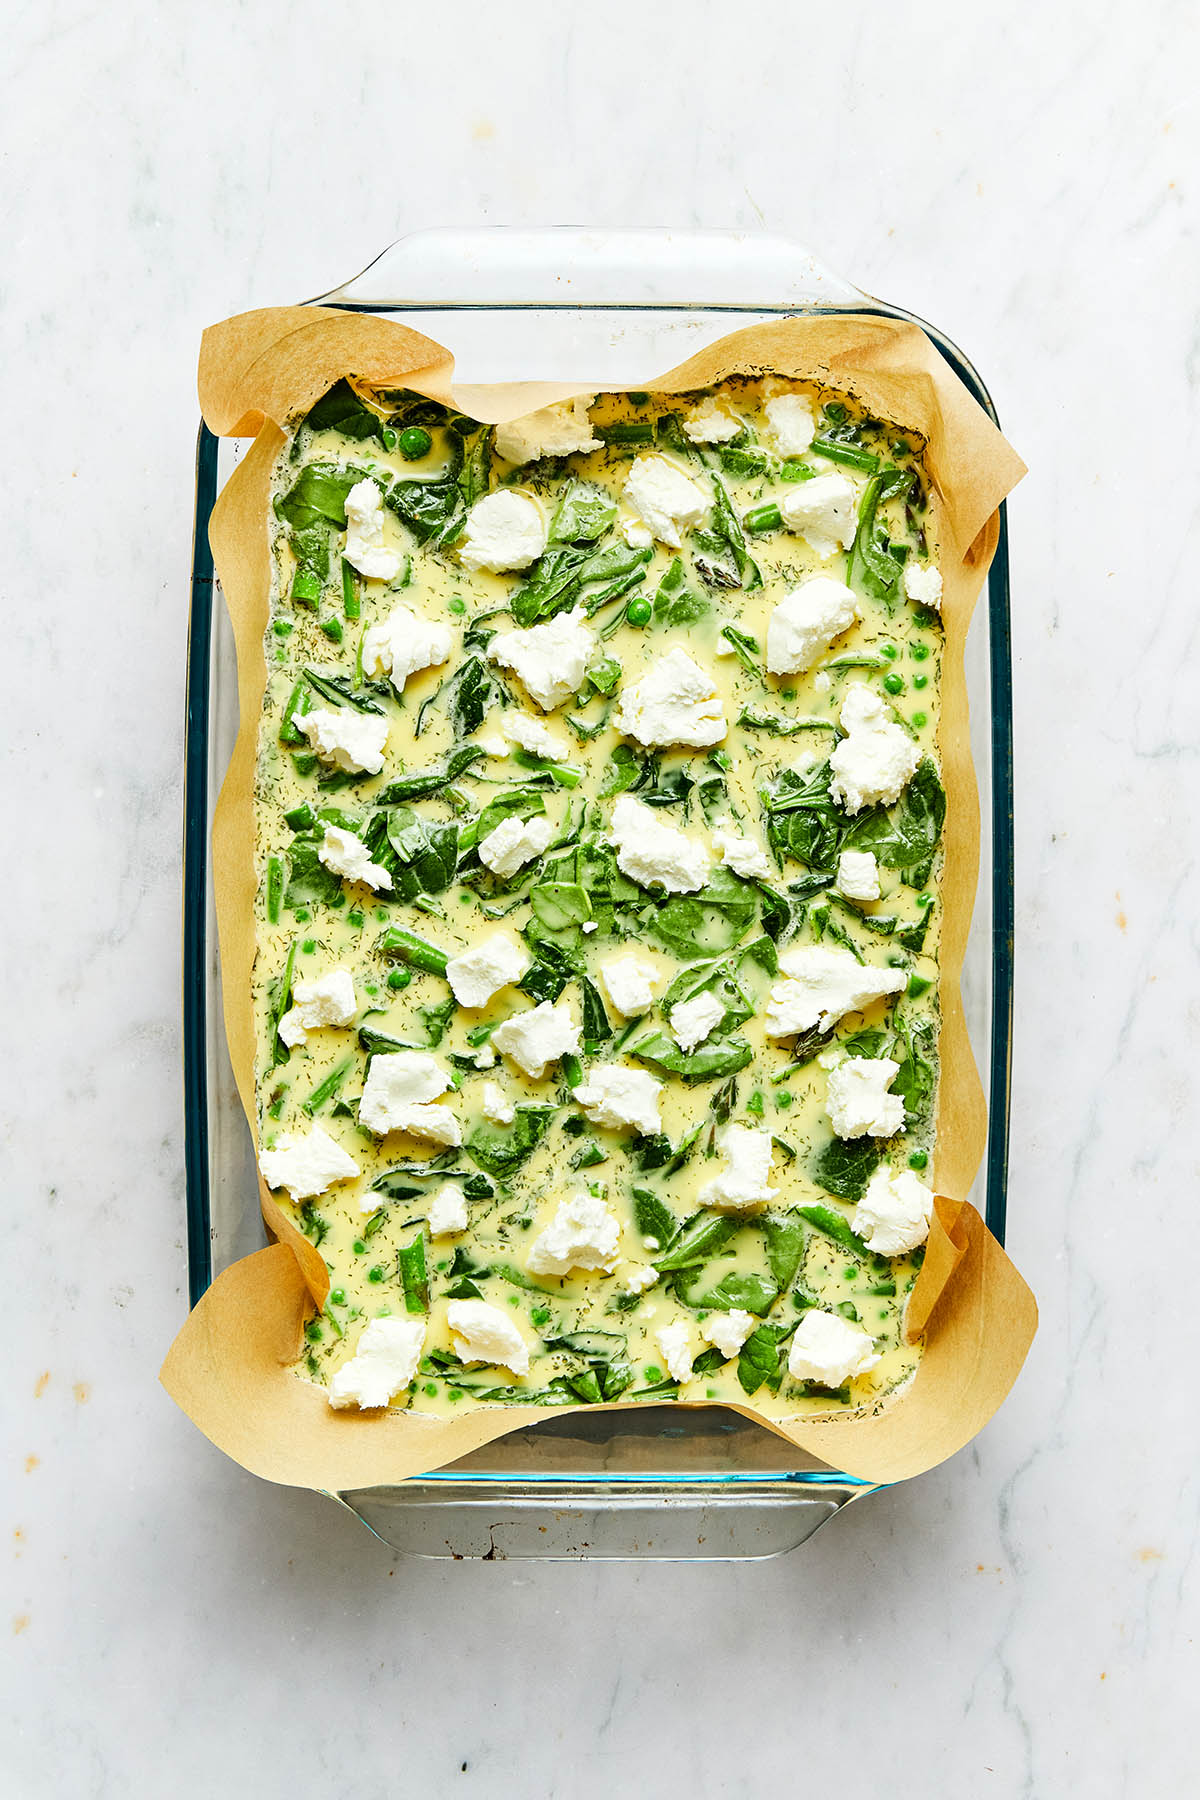 An unbaked egg casserole topped with chunks of soft goat cheese.